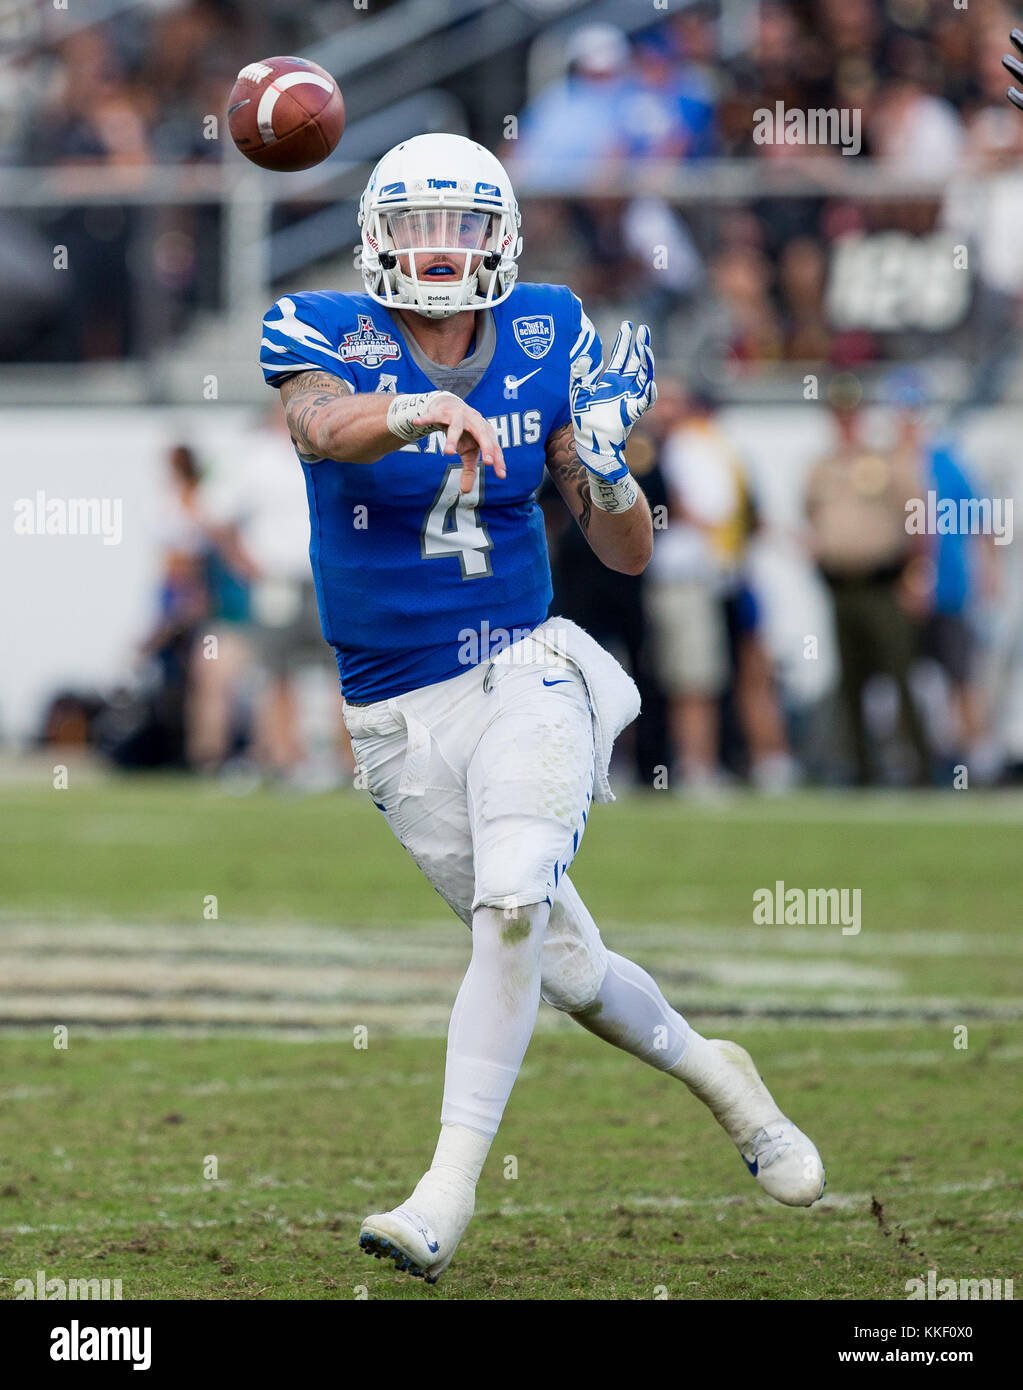 Orlando, FL, USA. 2nd Dec, 2017. Memphis QB Riley Ferguson #4 throws a pass during the AAC Championship football game between the UCF Knights and the Memphis Tigers at the Spectrum Stadium in Orlando, FL. Kyle Okita/CSM/Alamy Live News Stock Photo